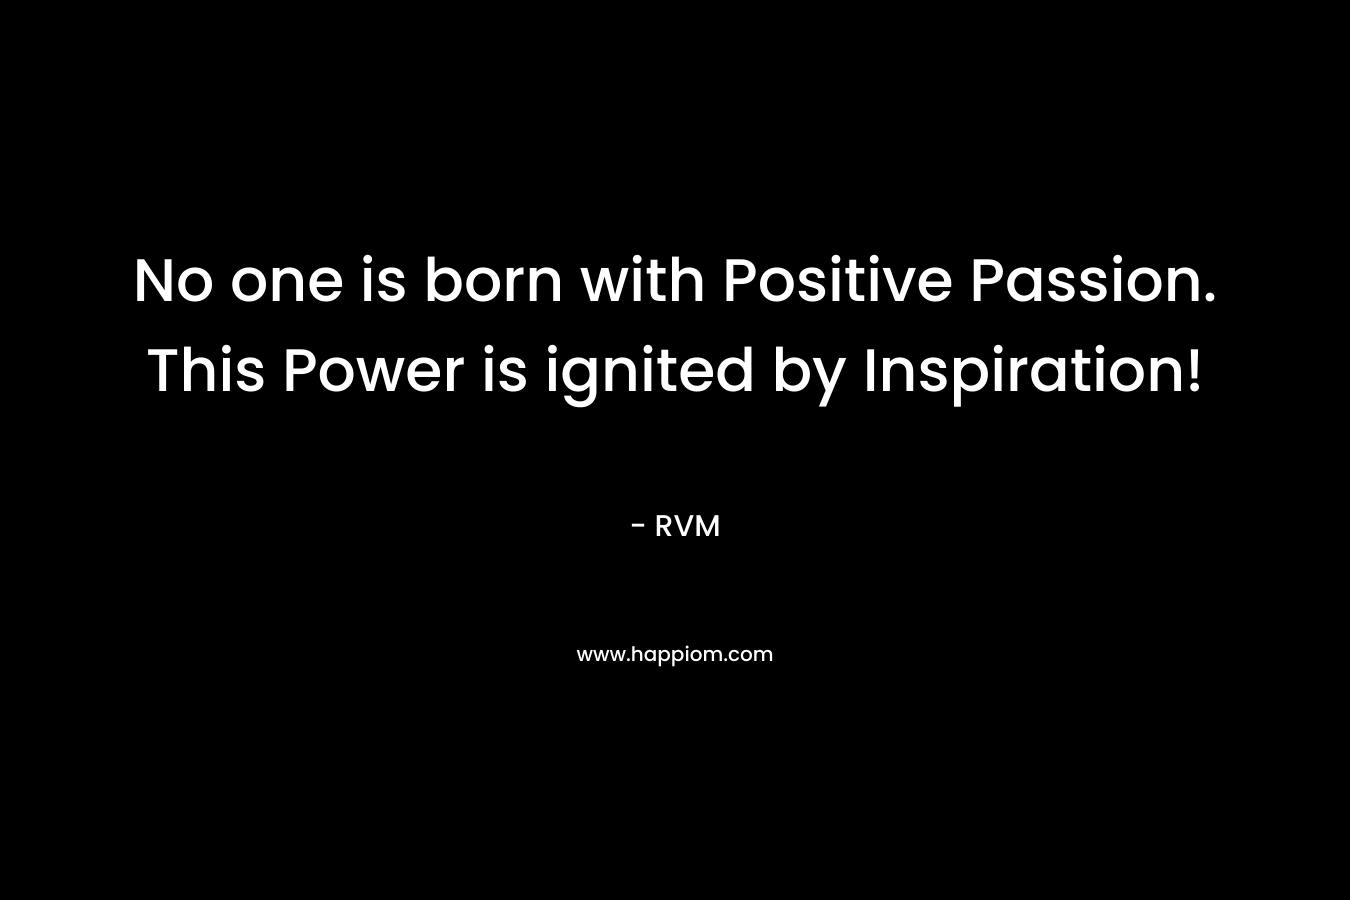 No one is born with Positive Passion. This Power is ignited by Inspiration! – RVM